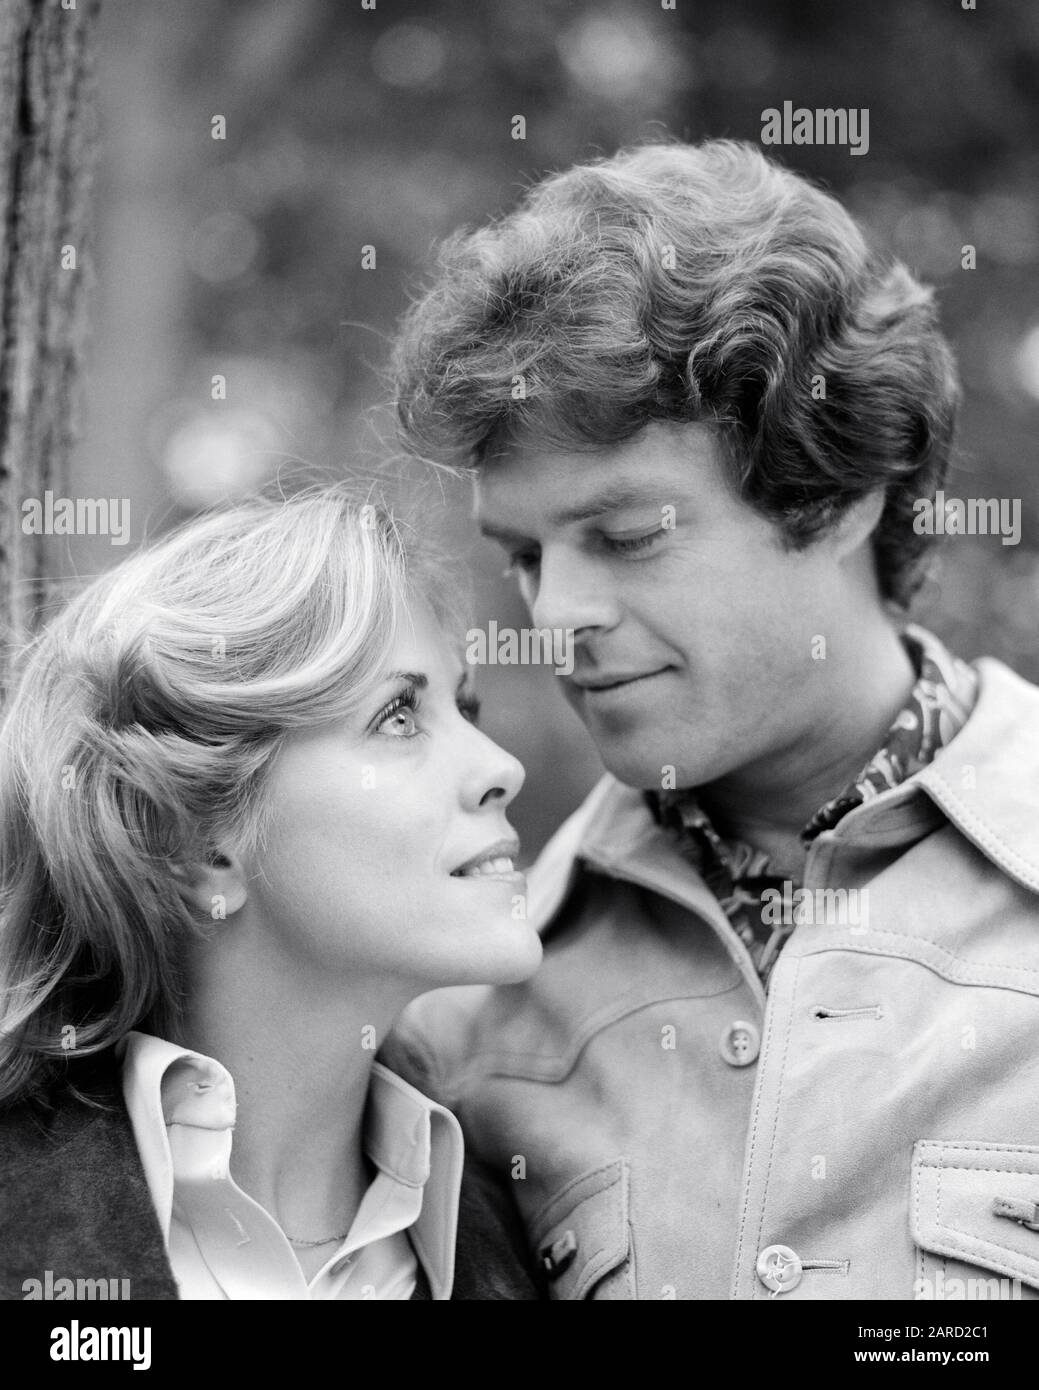 1970s HANDSOME YOUNG MAN LOOKING ADMIRINGLY INTO THE FACE OF STARRY EYED YOUNG BLOND WOMAN AUTUMN OUTDOORS pic